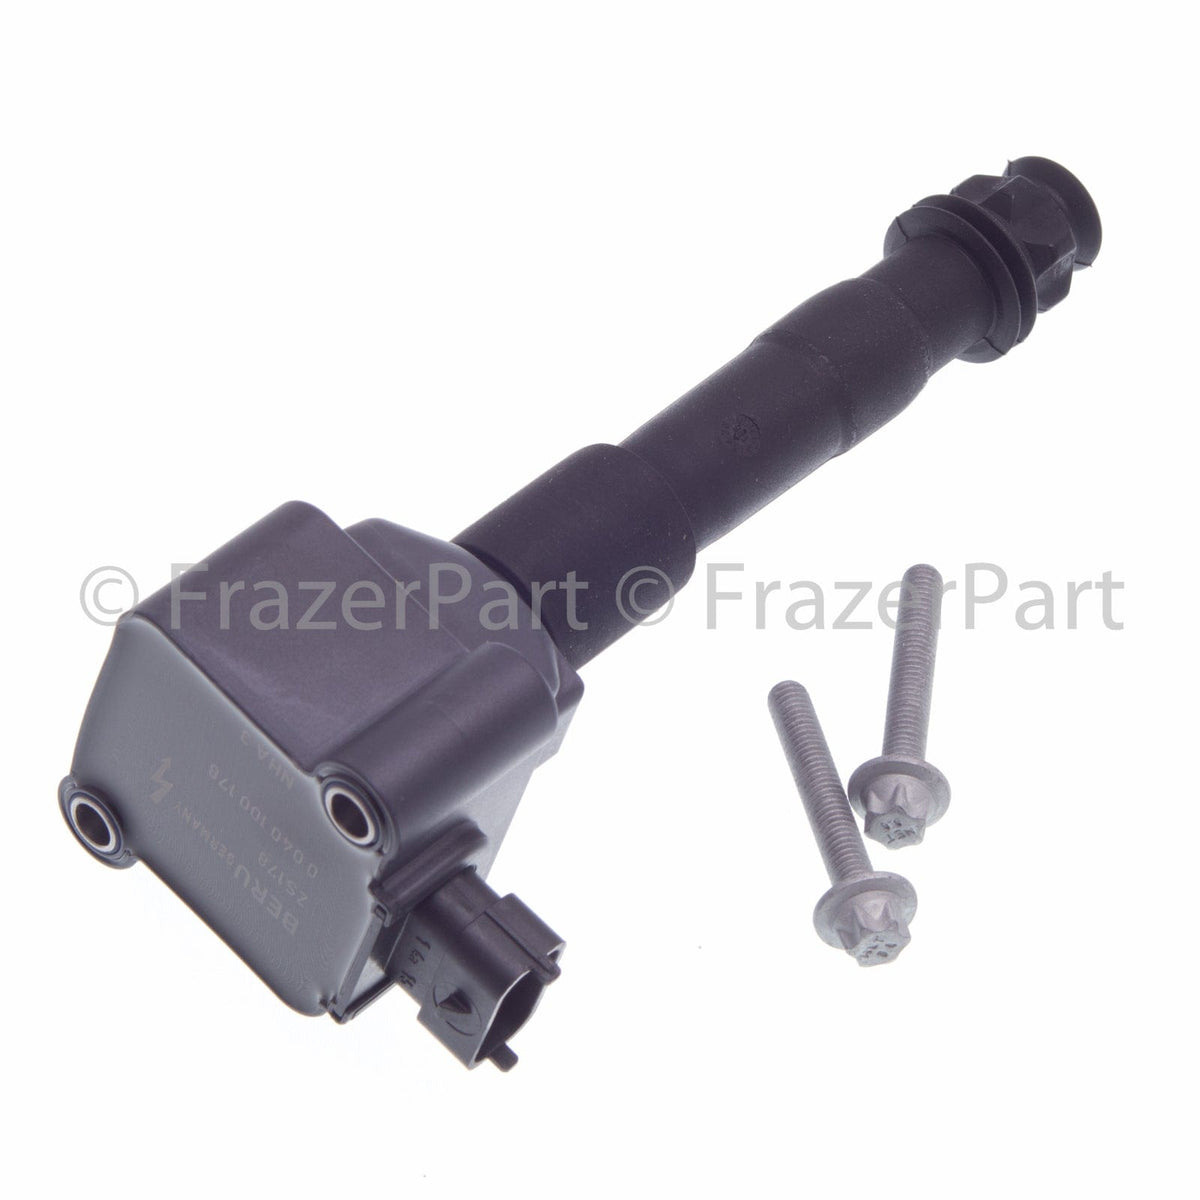 Ignition coils for 986/987 Boxster/Cayman (all models 03-08) & 996/997 Carrera (all models 02-08)